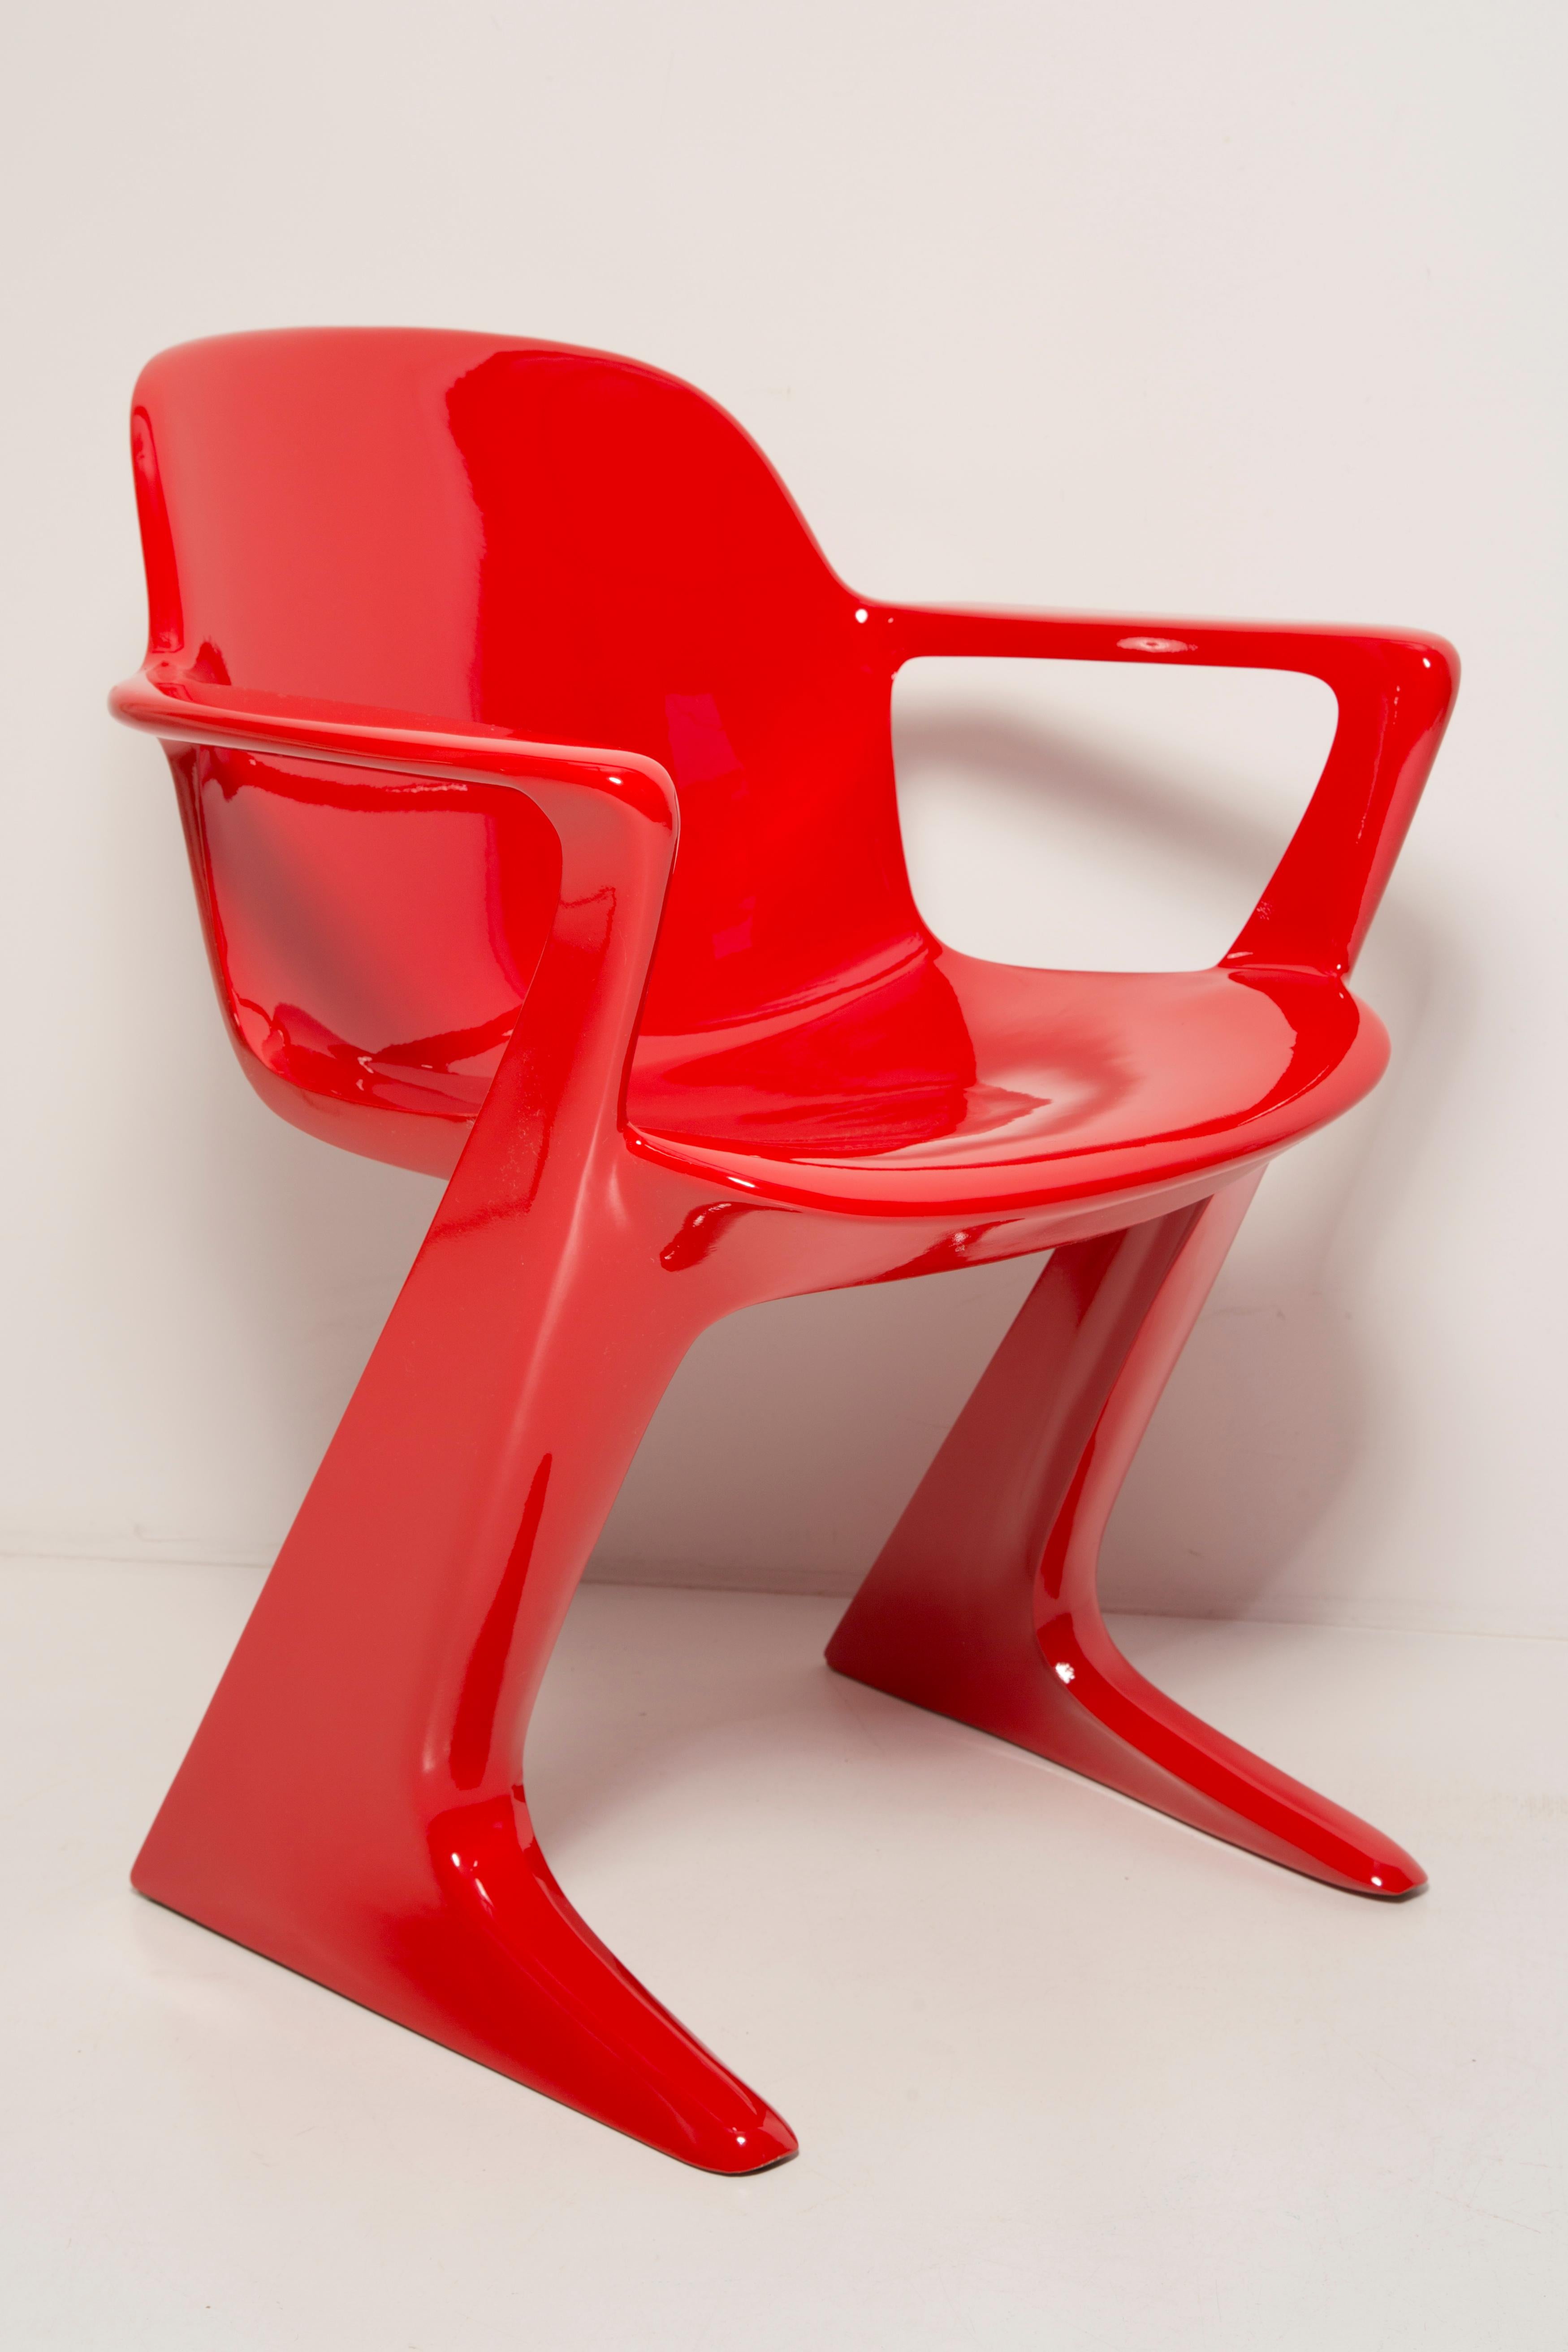 20th Century Midcentury Signal Red Kangaroo Chair Designed by Ernst Moeckl, Germany, 1968 For Sale